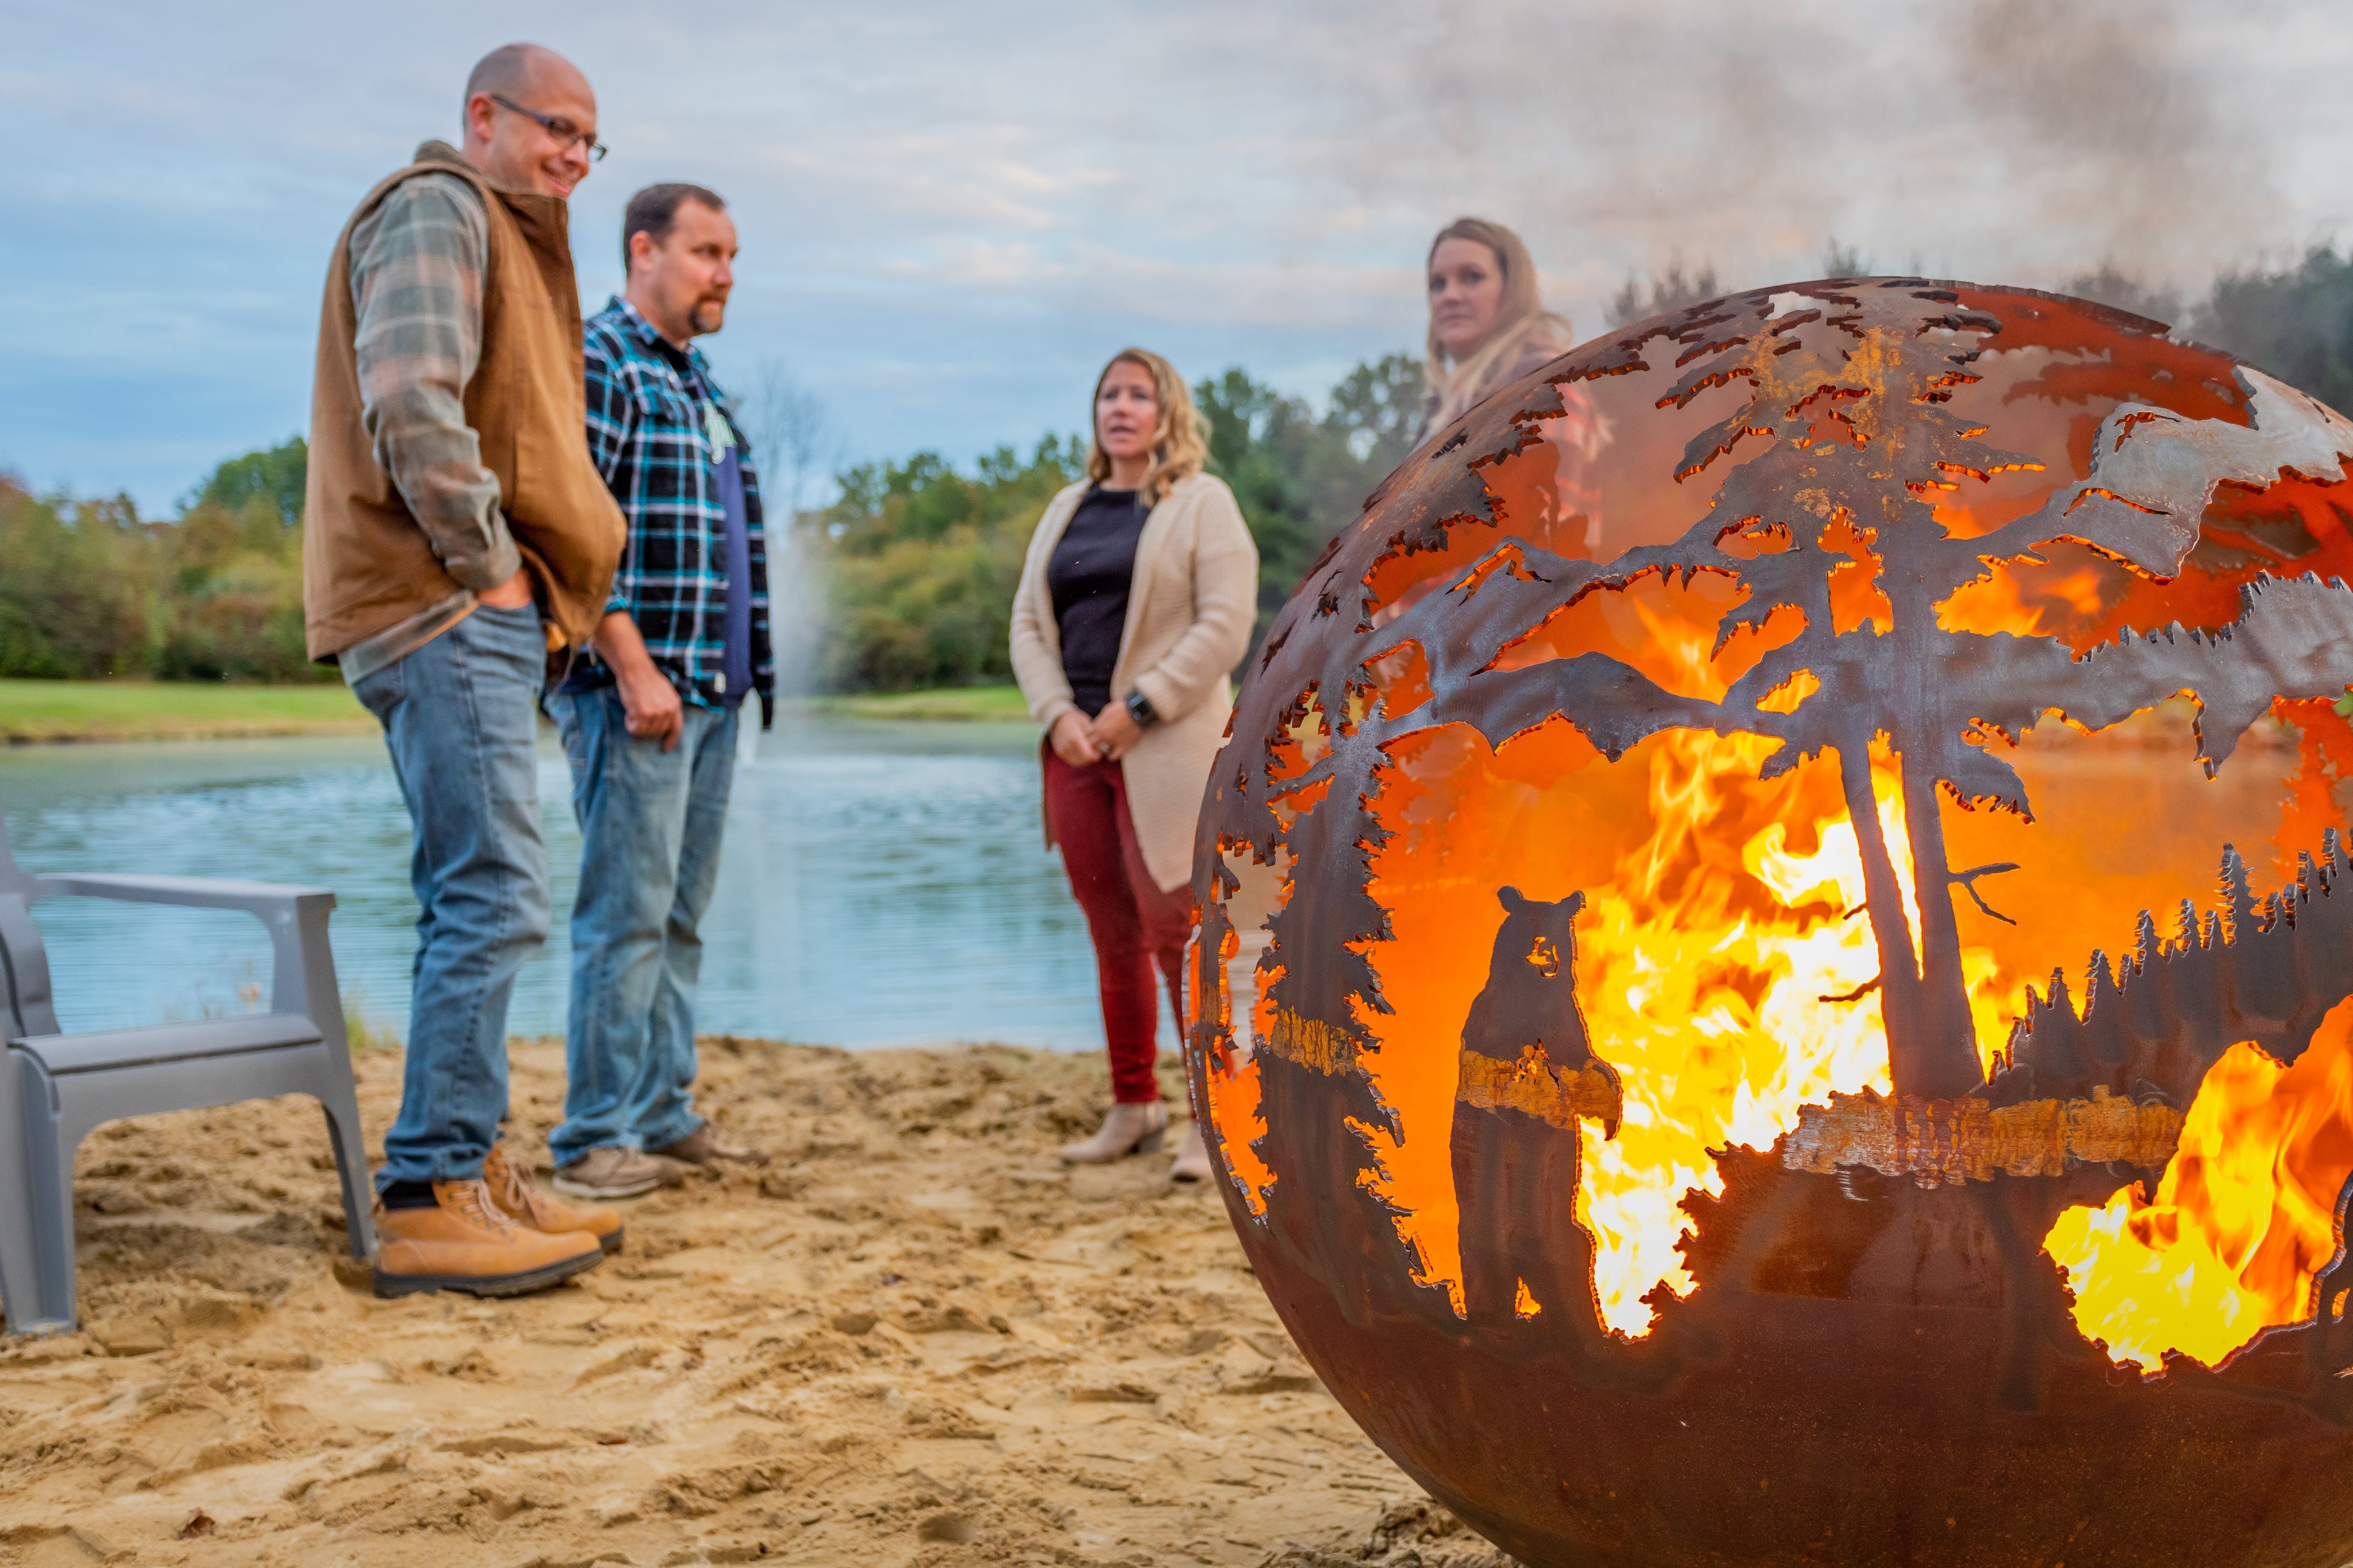 The Fire Pit Gallery Smokey Mountains Fire Pit Sphere